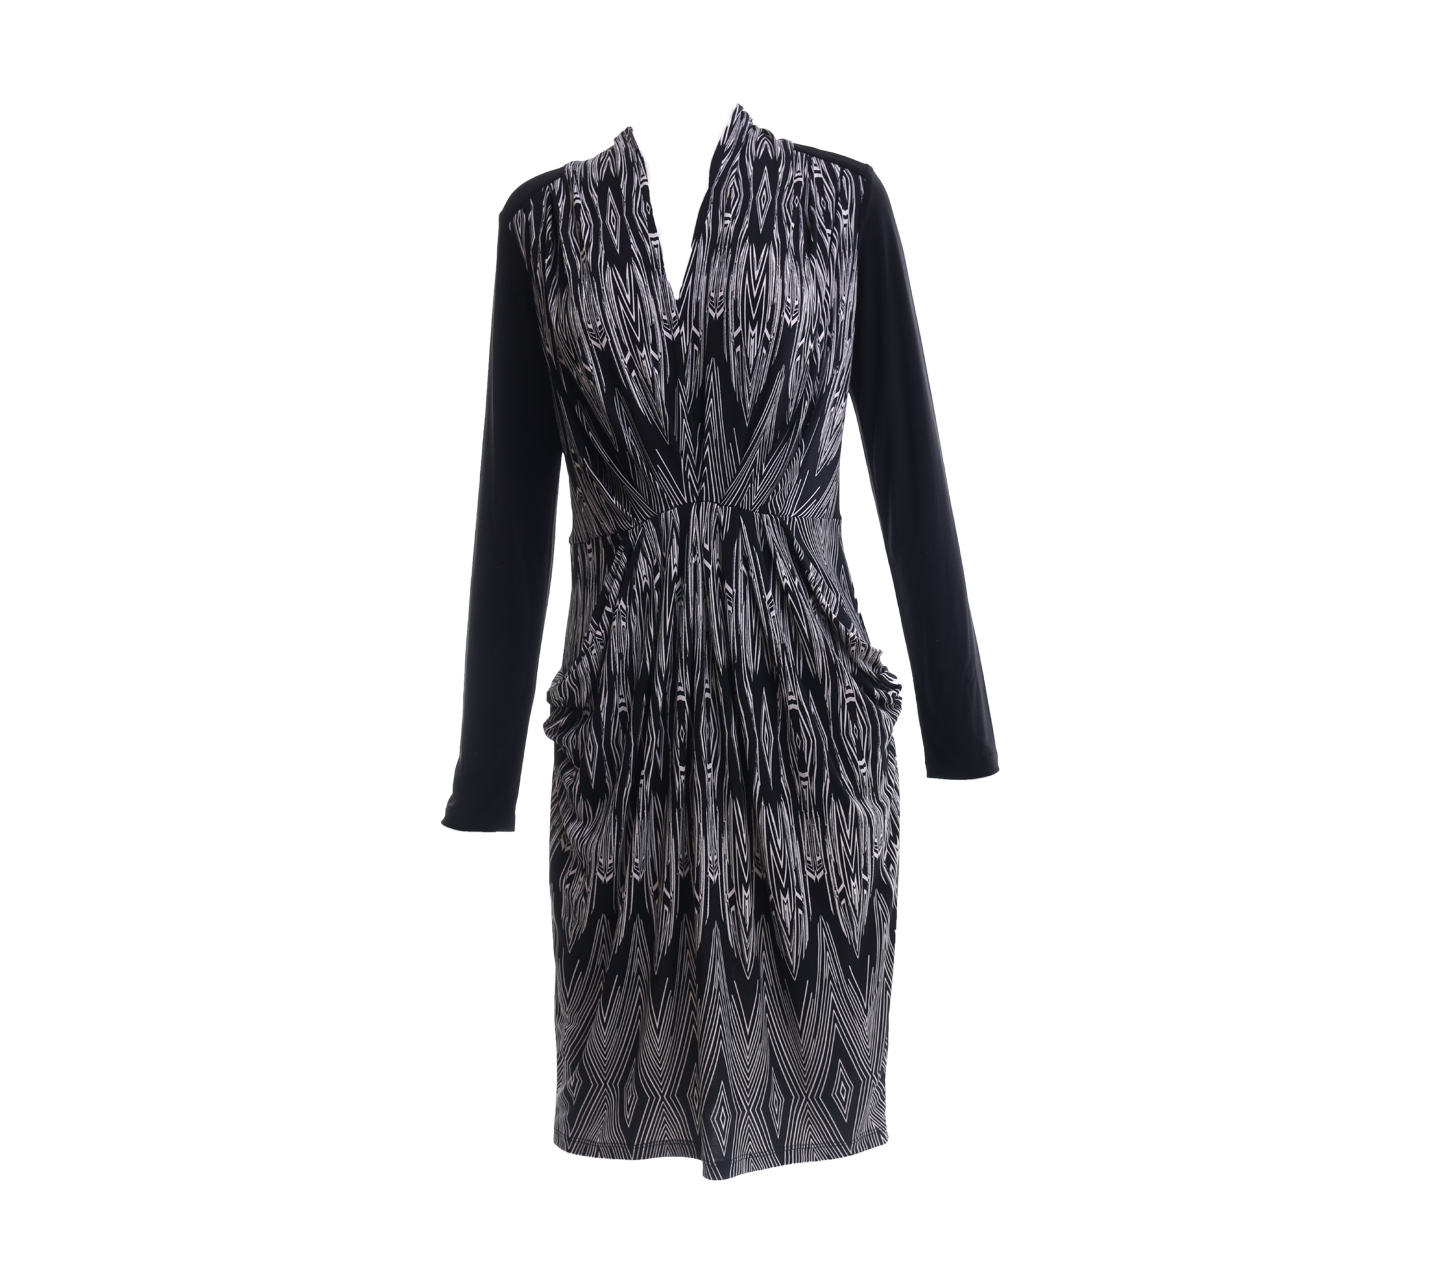 Butterfly By Matthew Williamson Black And White Patterned Midi Dress